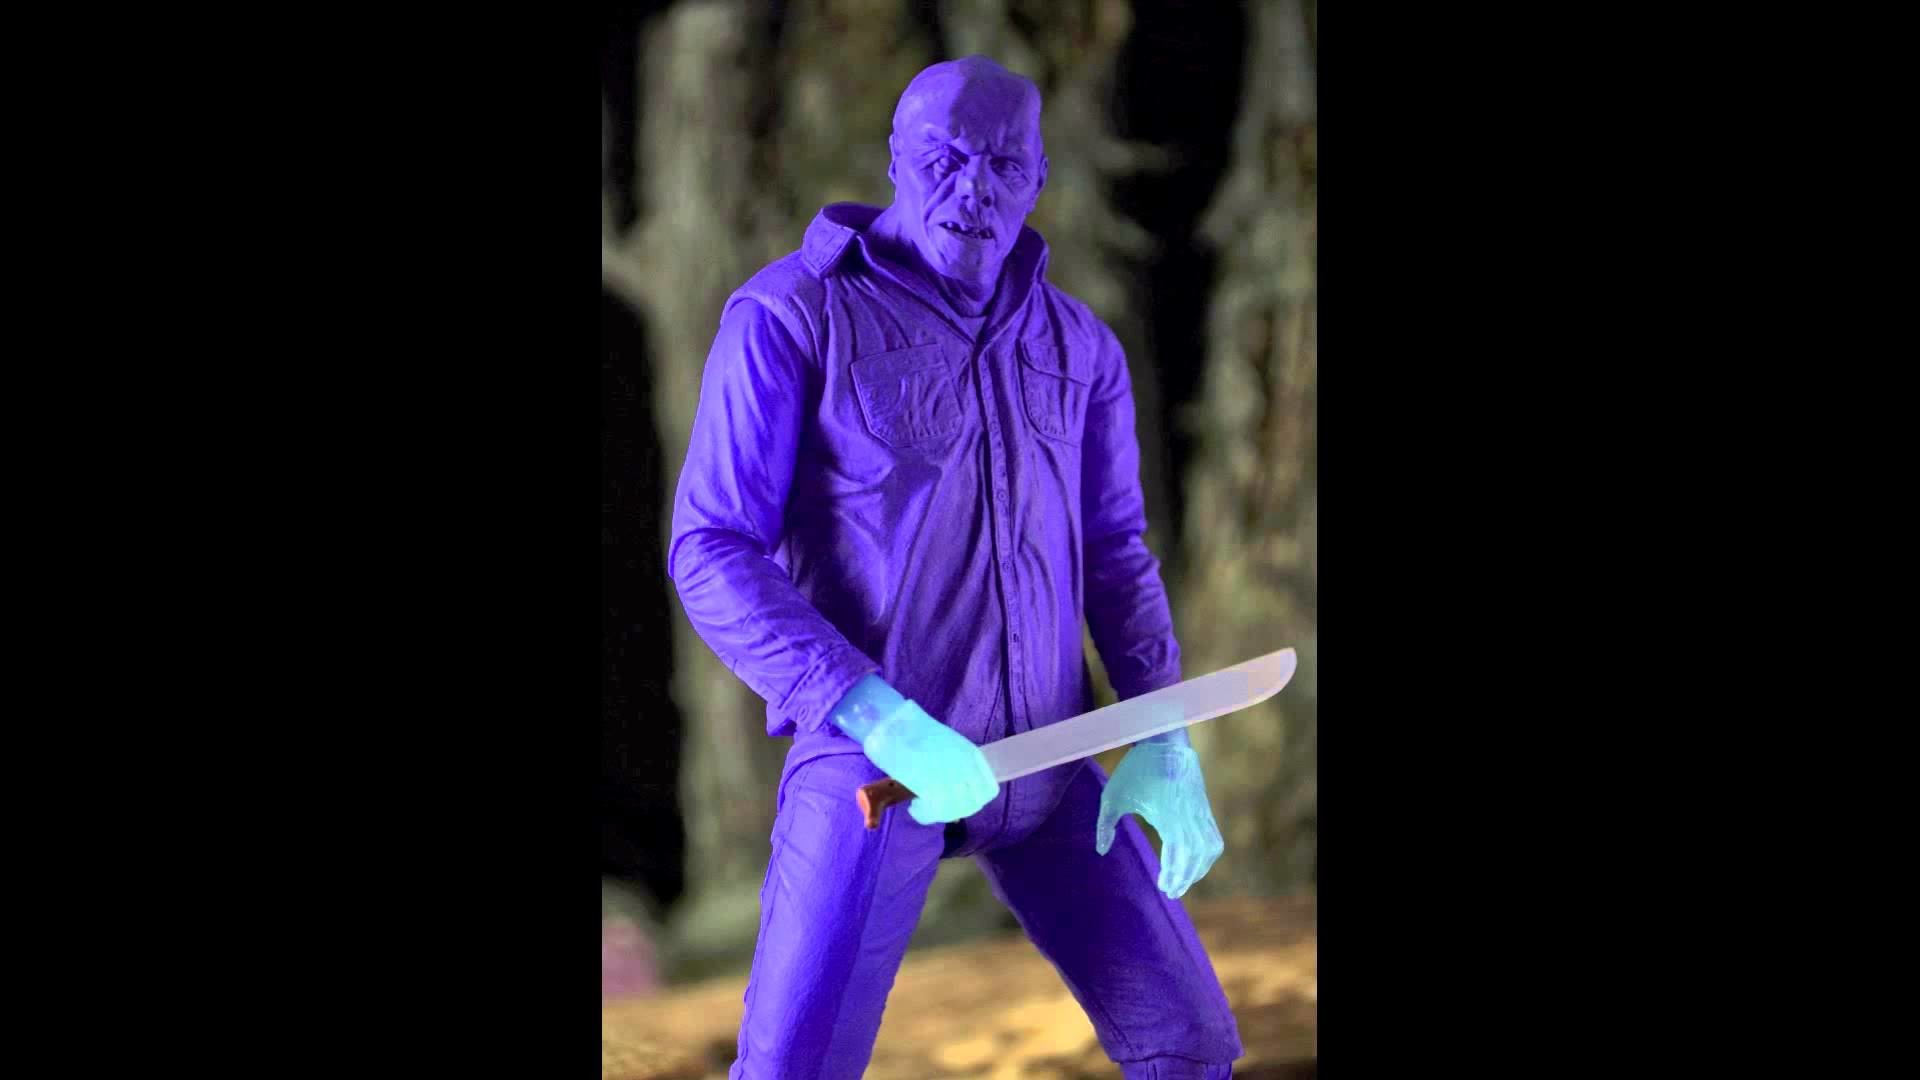 1920x1080 NECA's Friday the 13th SDCC 2013 Exclusive! - YouTube